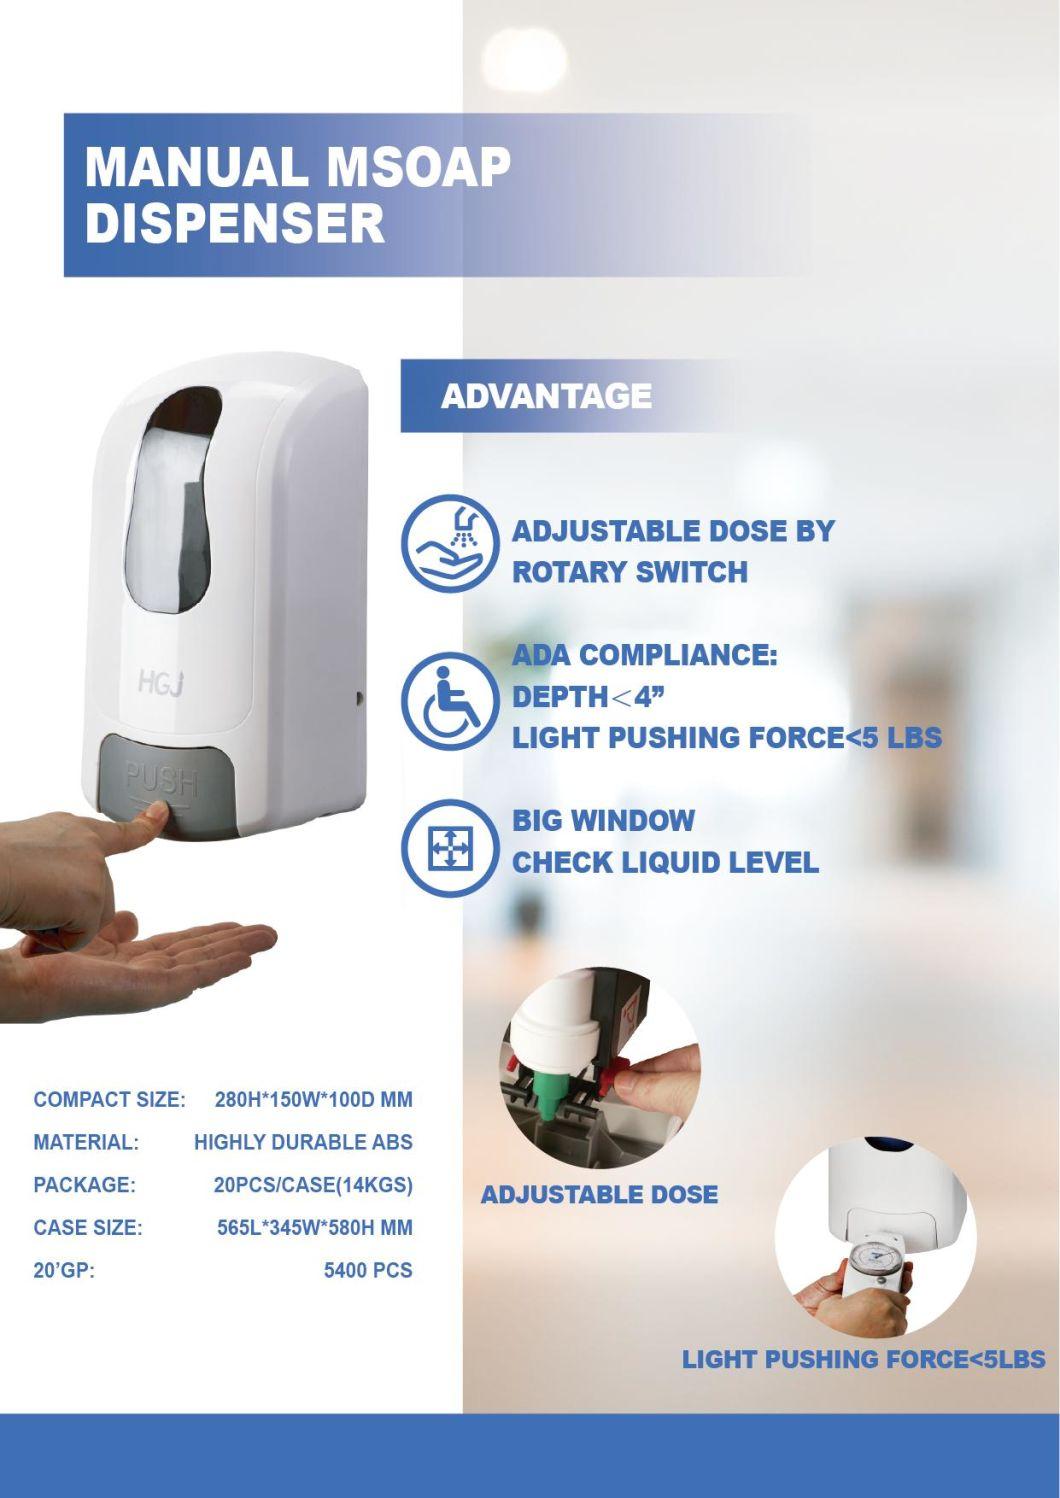 Wholesale High Quality Wall Mounted Manual Hand Sanitizer Soap Dispenser